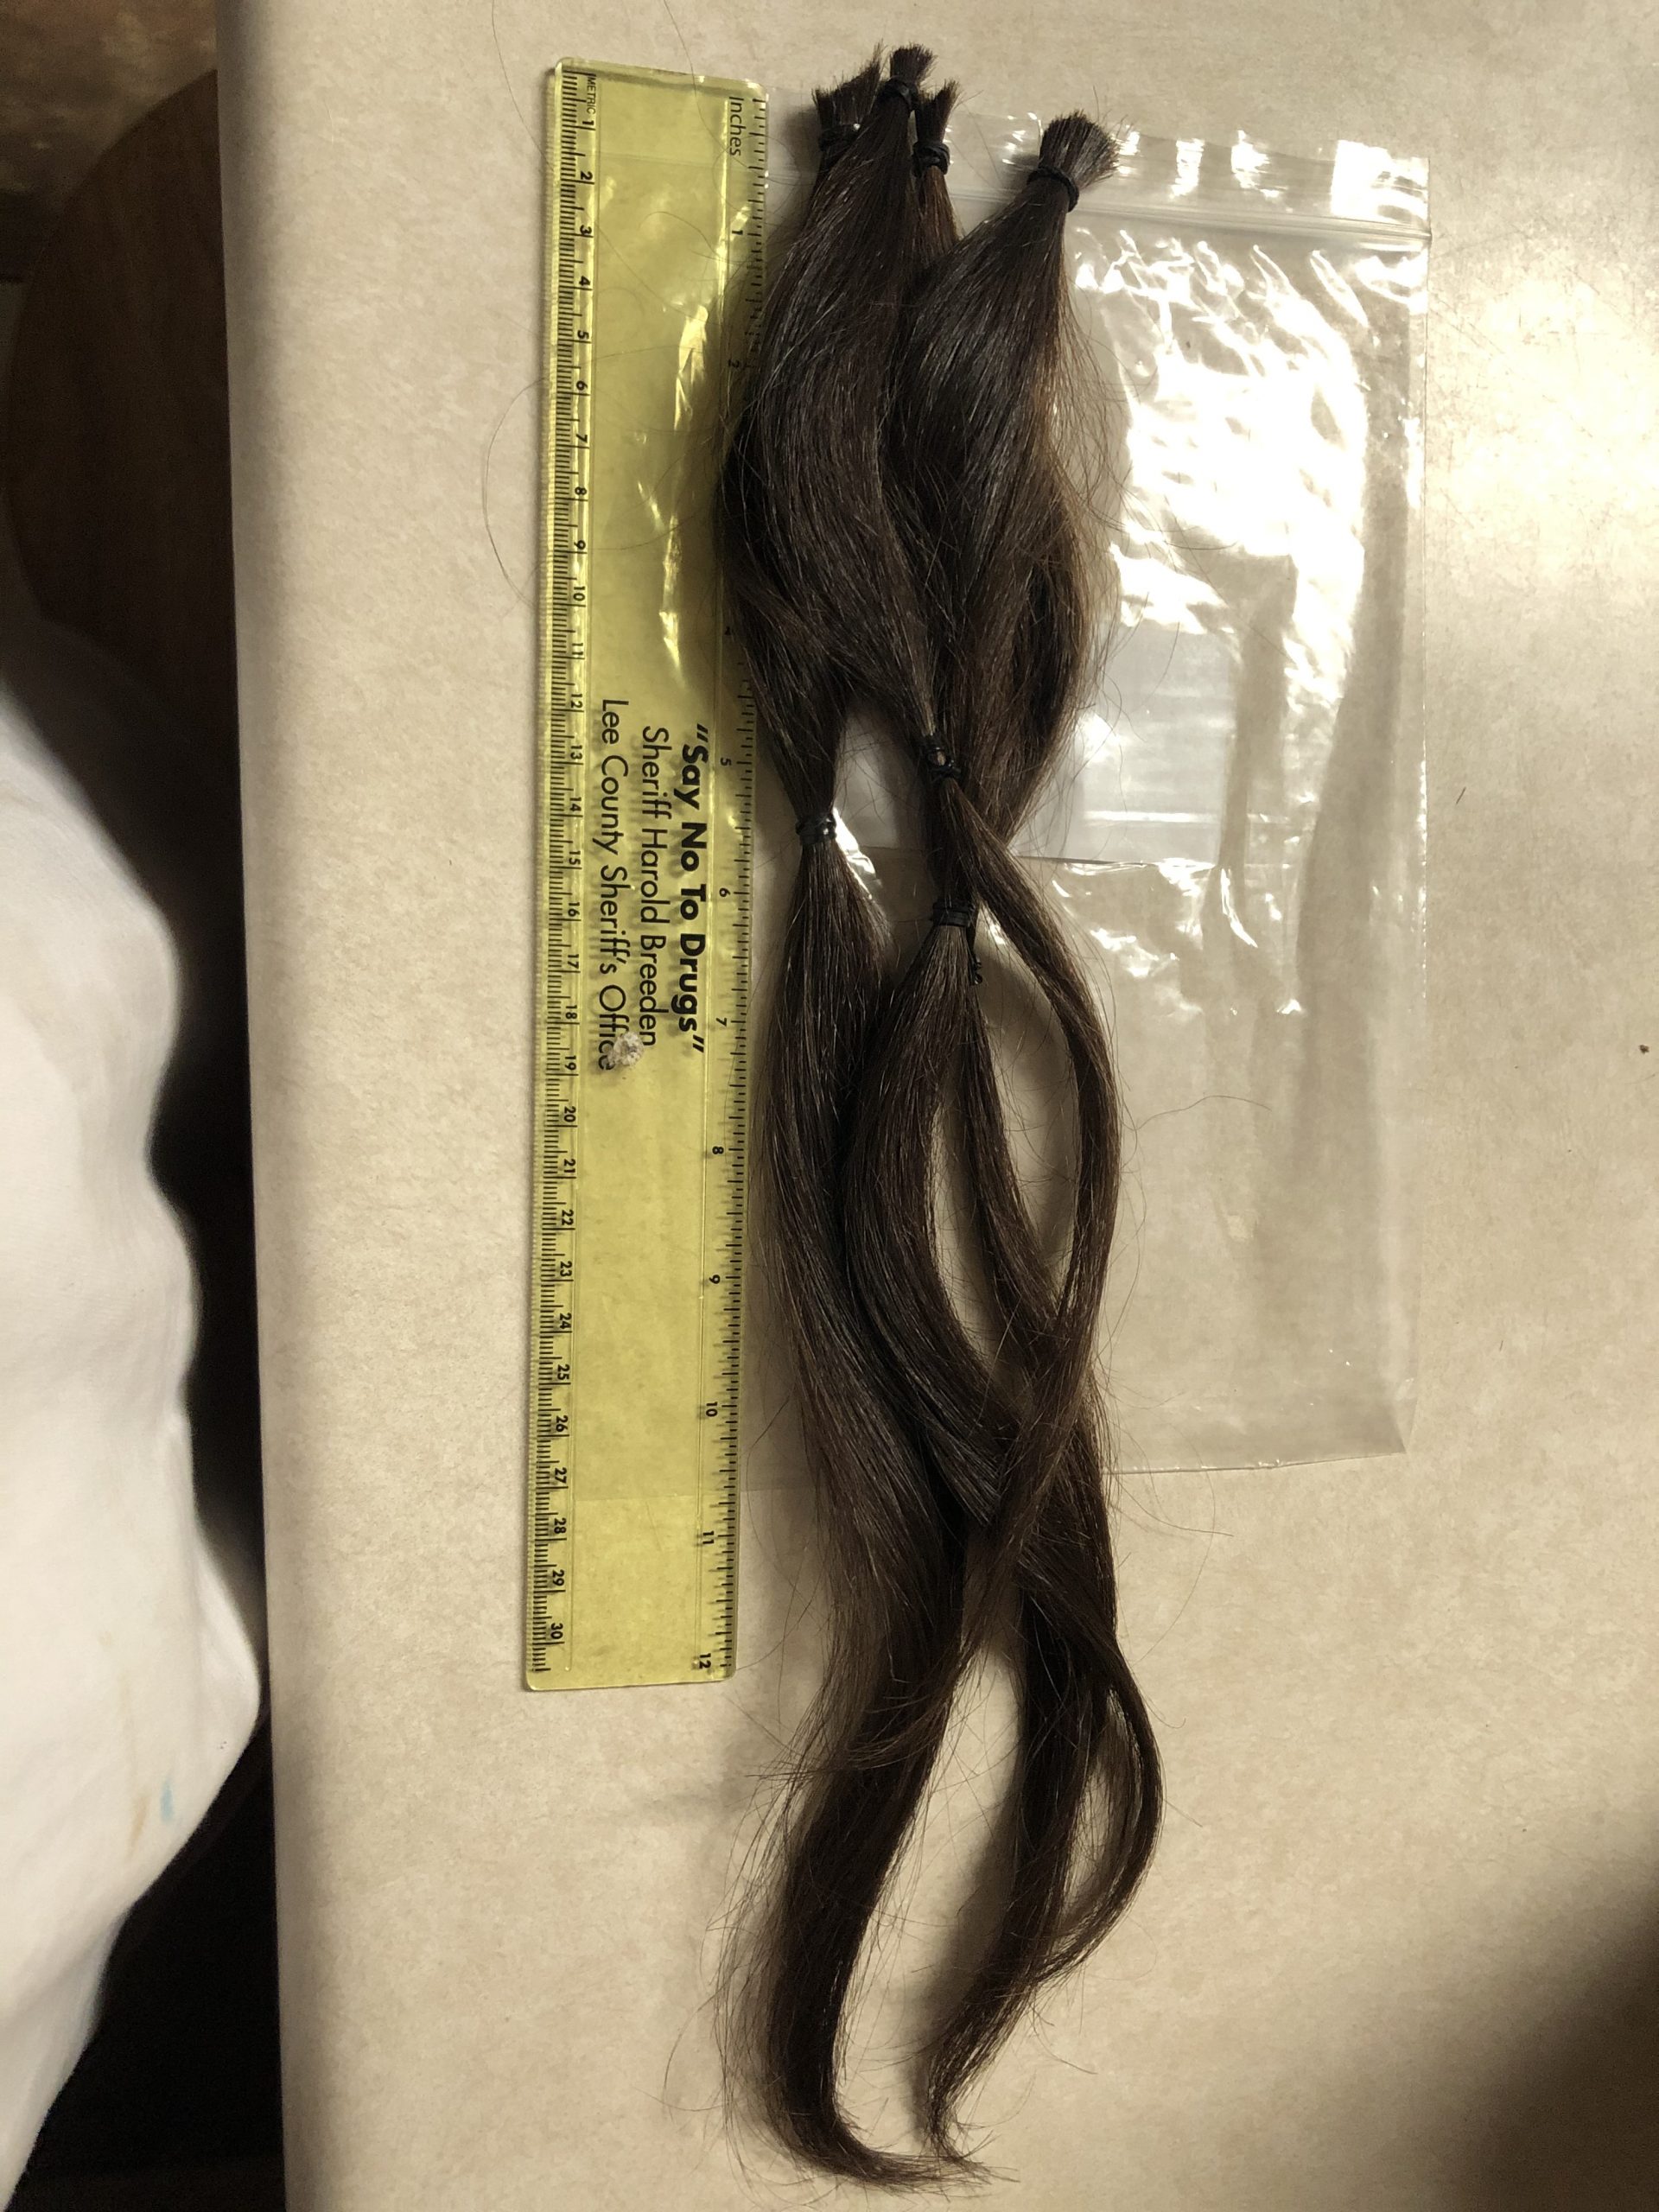 16 inches of brown male hair